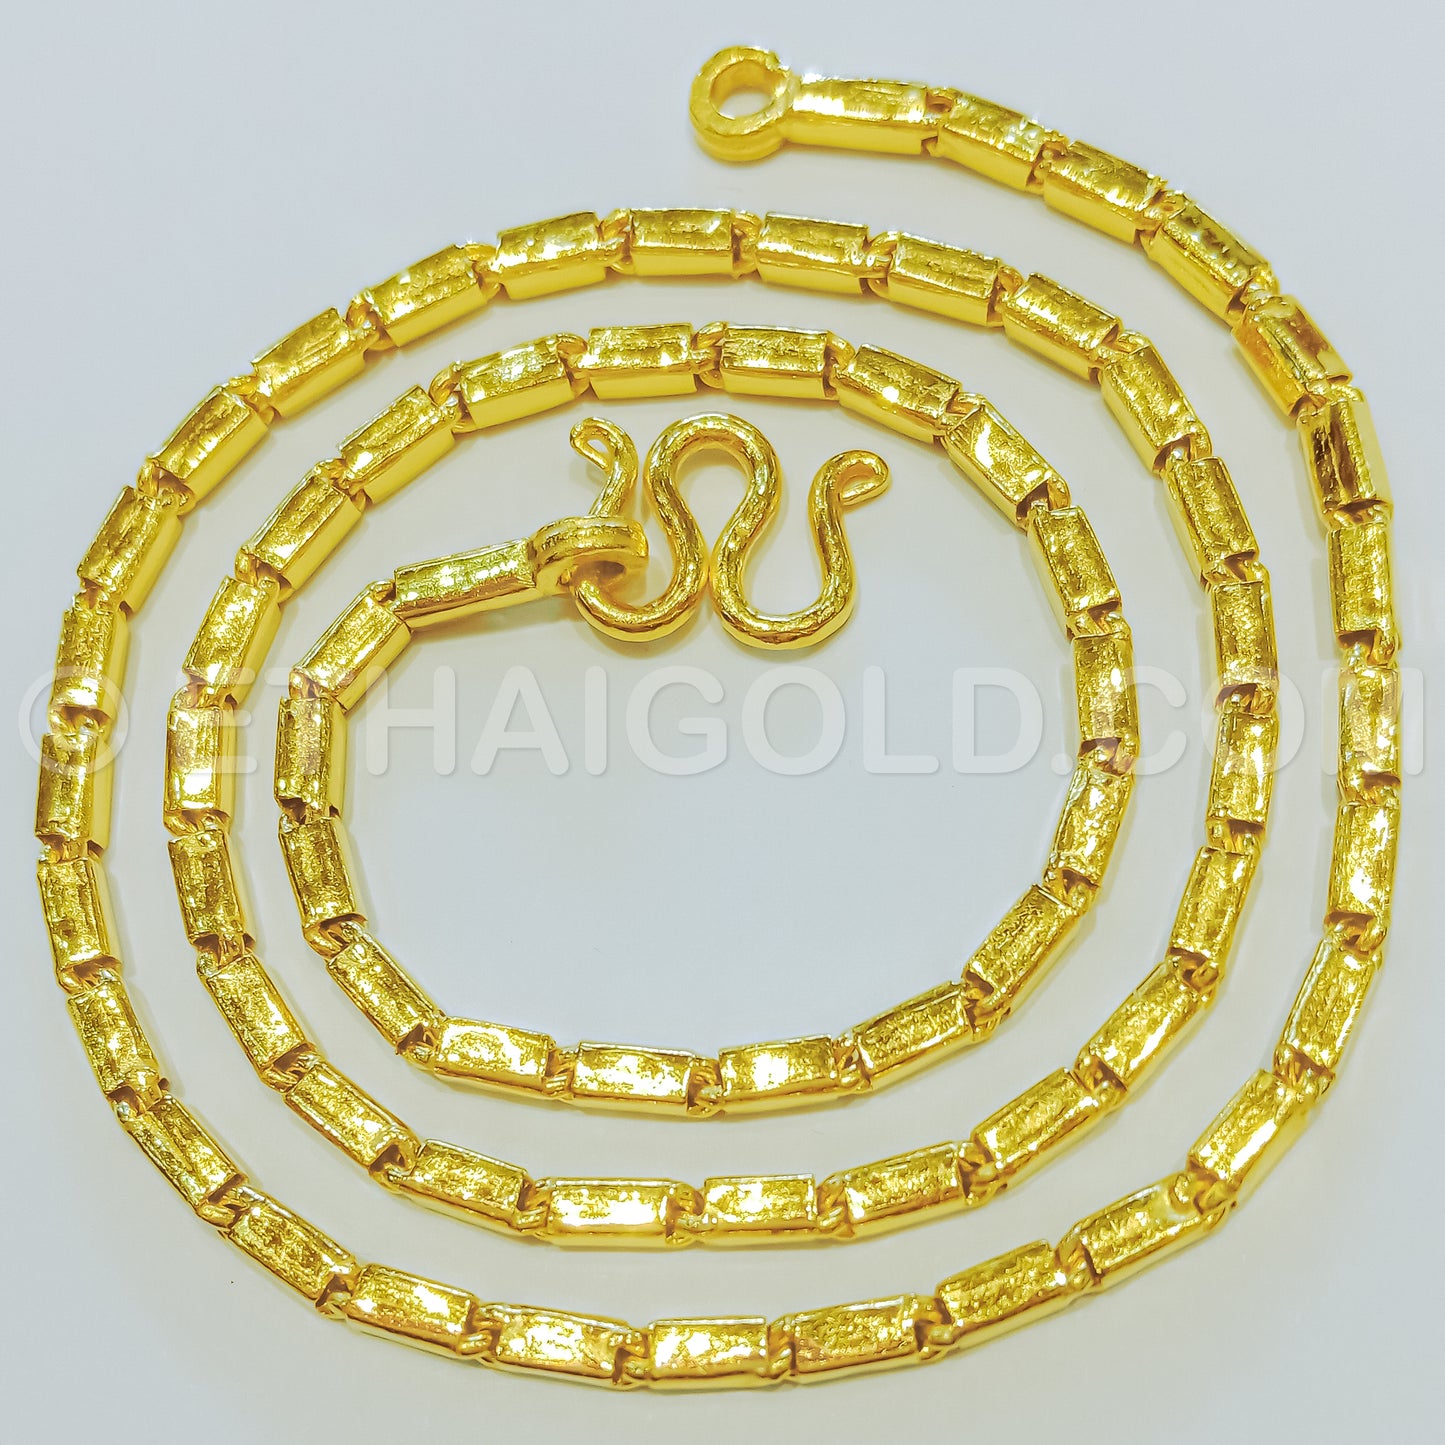 1 BAHT POLISHED SOLID SHORT SQUARE BARREL CHAIN NECKLACE IN 23K GOLD (ID: N1901B)